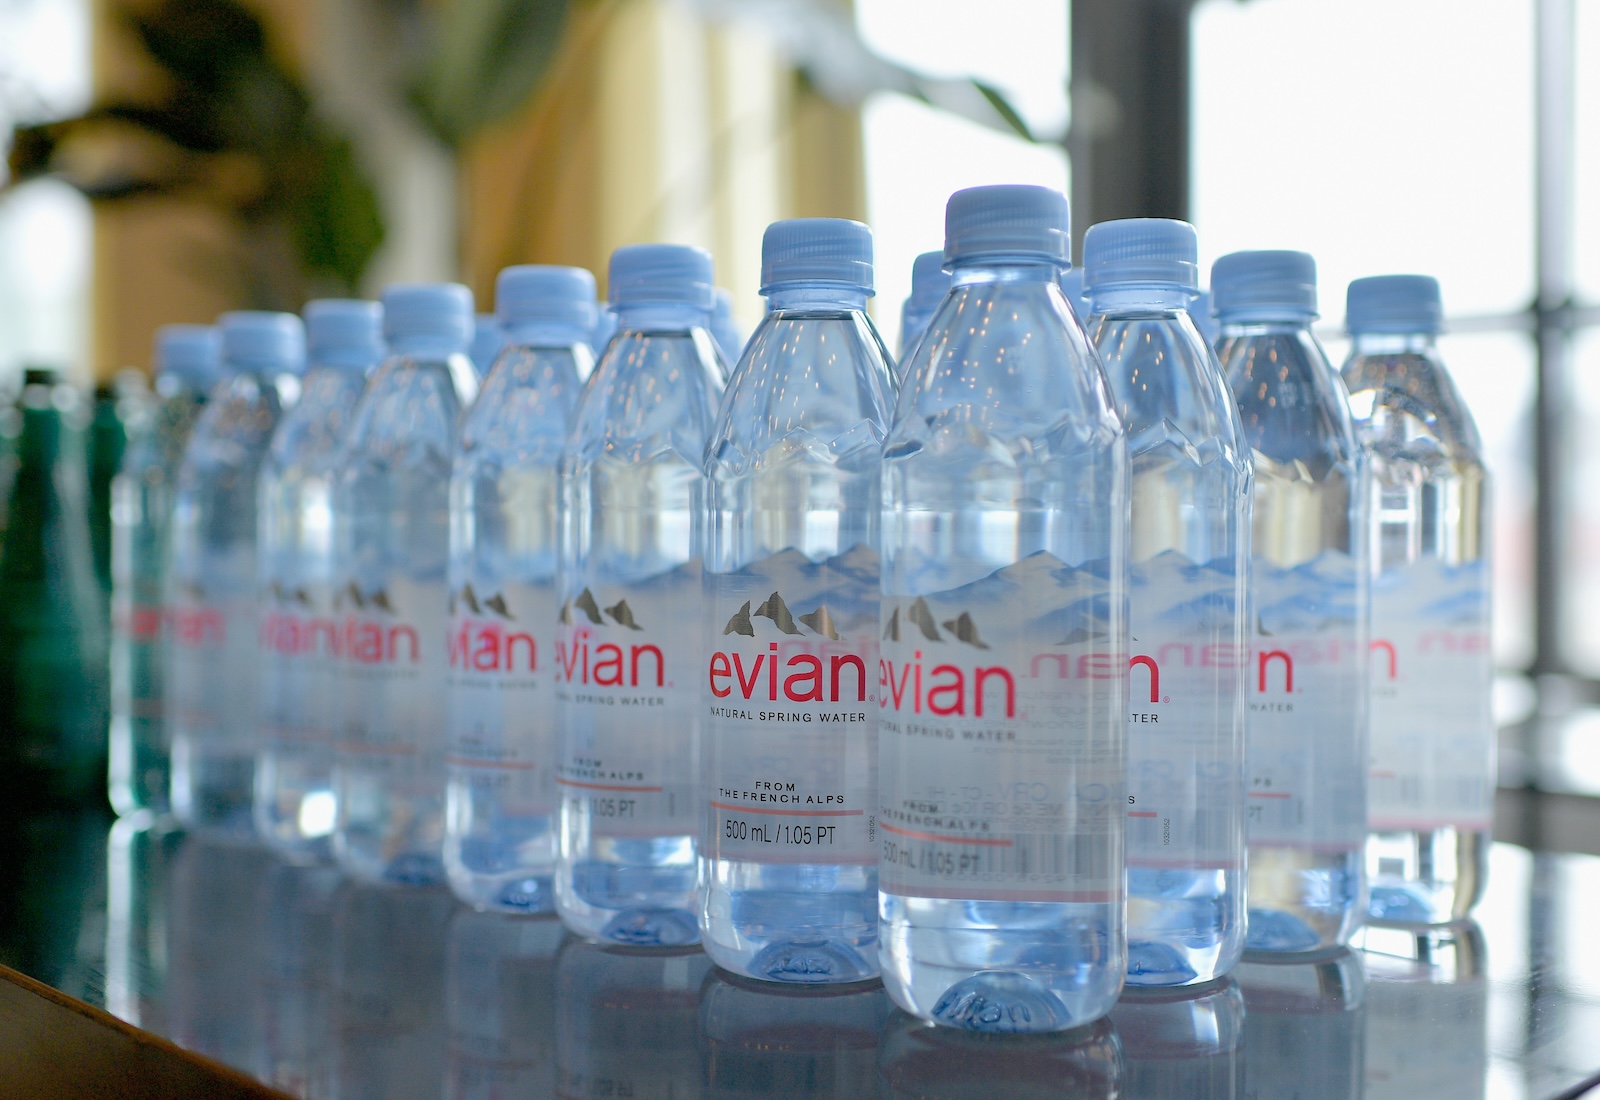 Rows of Evian bottled water on a table, with blurred plant in the background. Labels say natural spring water.